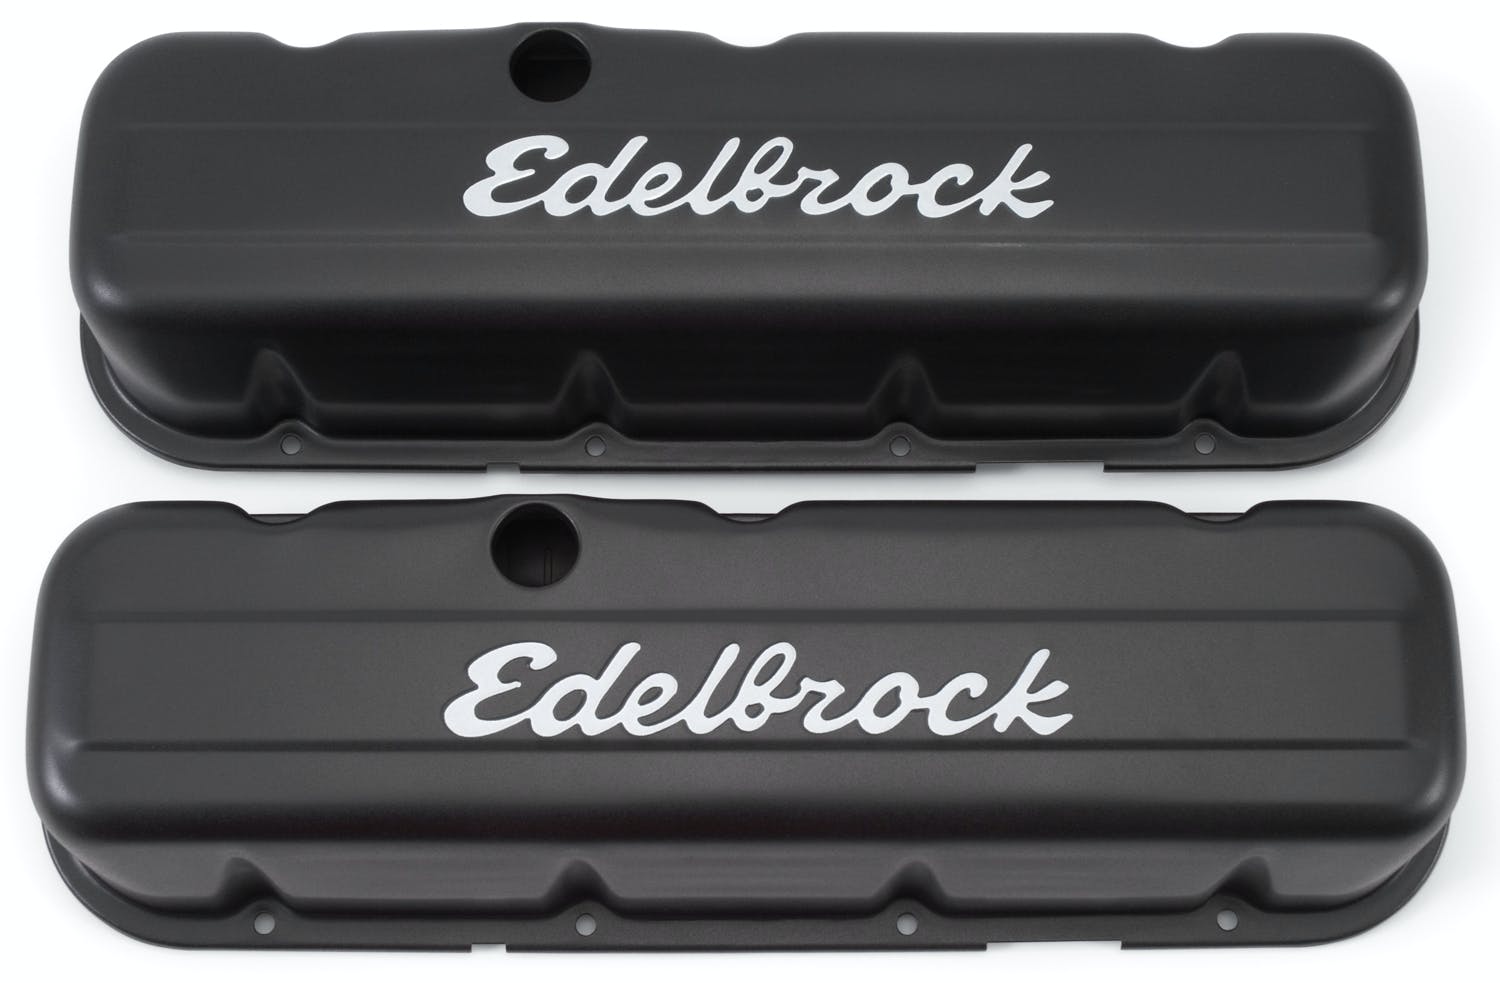 Edelbrock 4683 Signature Series Valve Covers for Chevrolet 396-502 V8 65 and Later